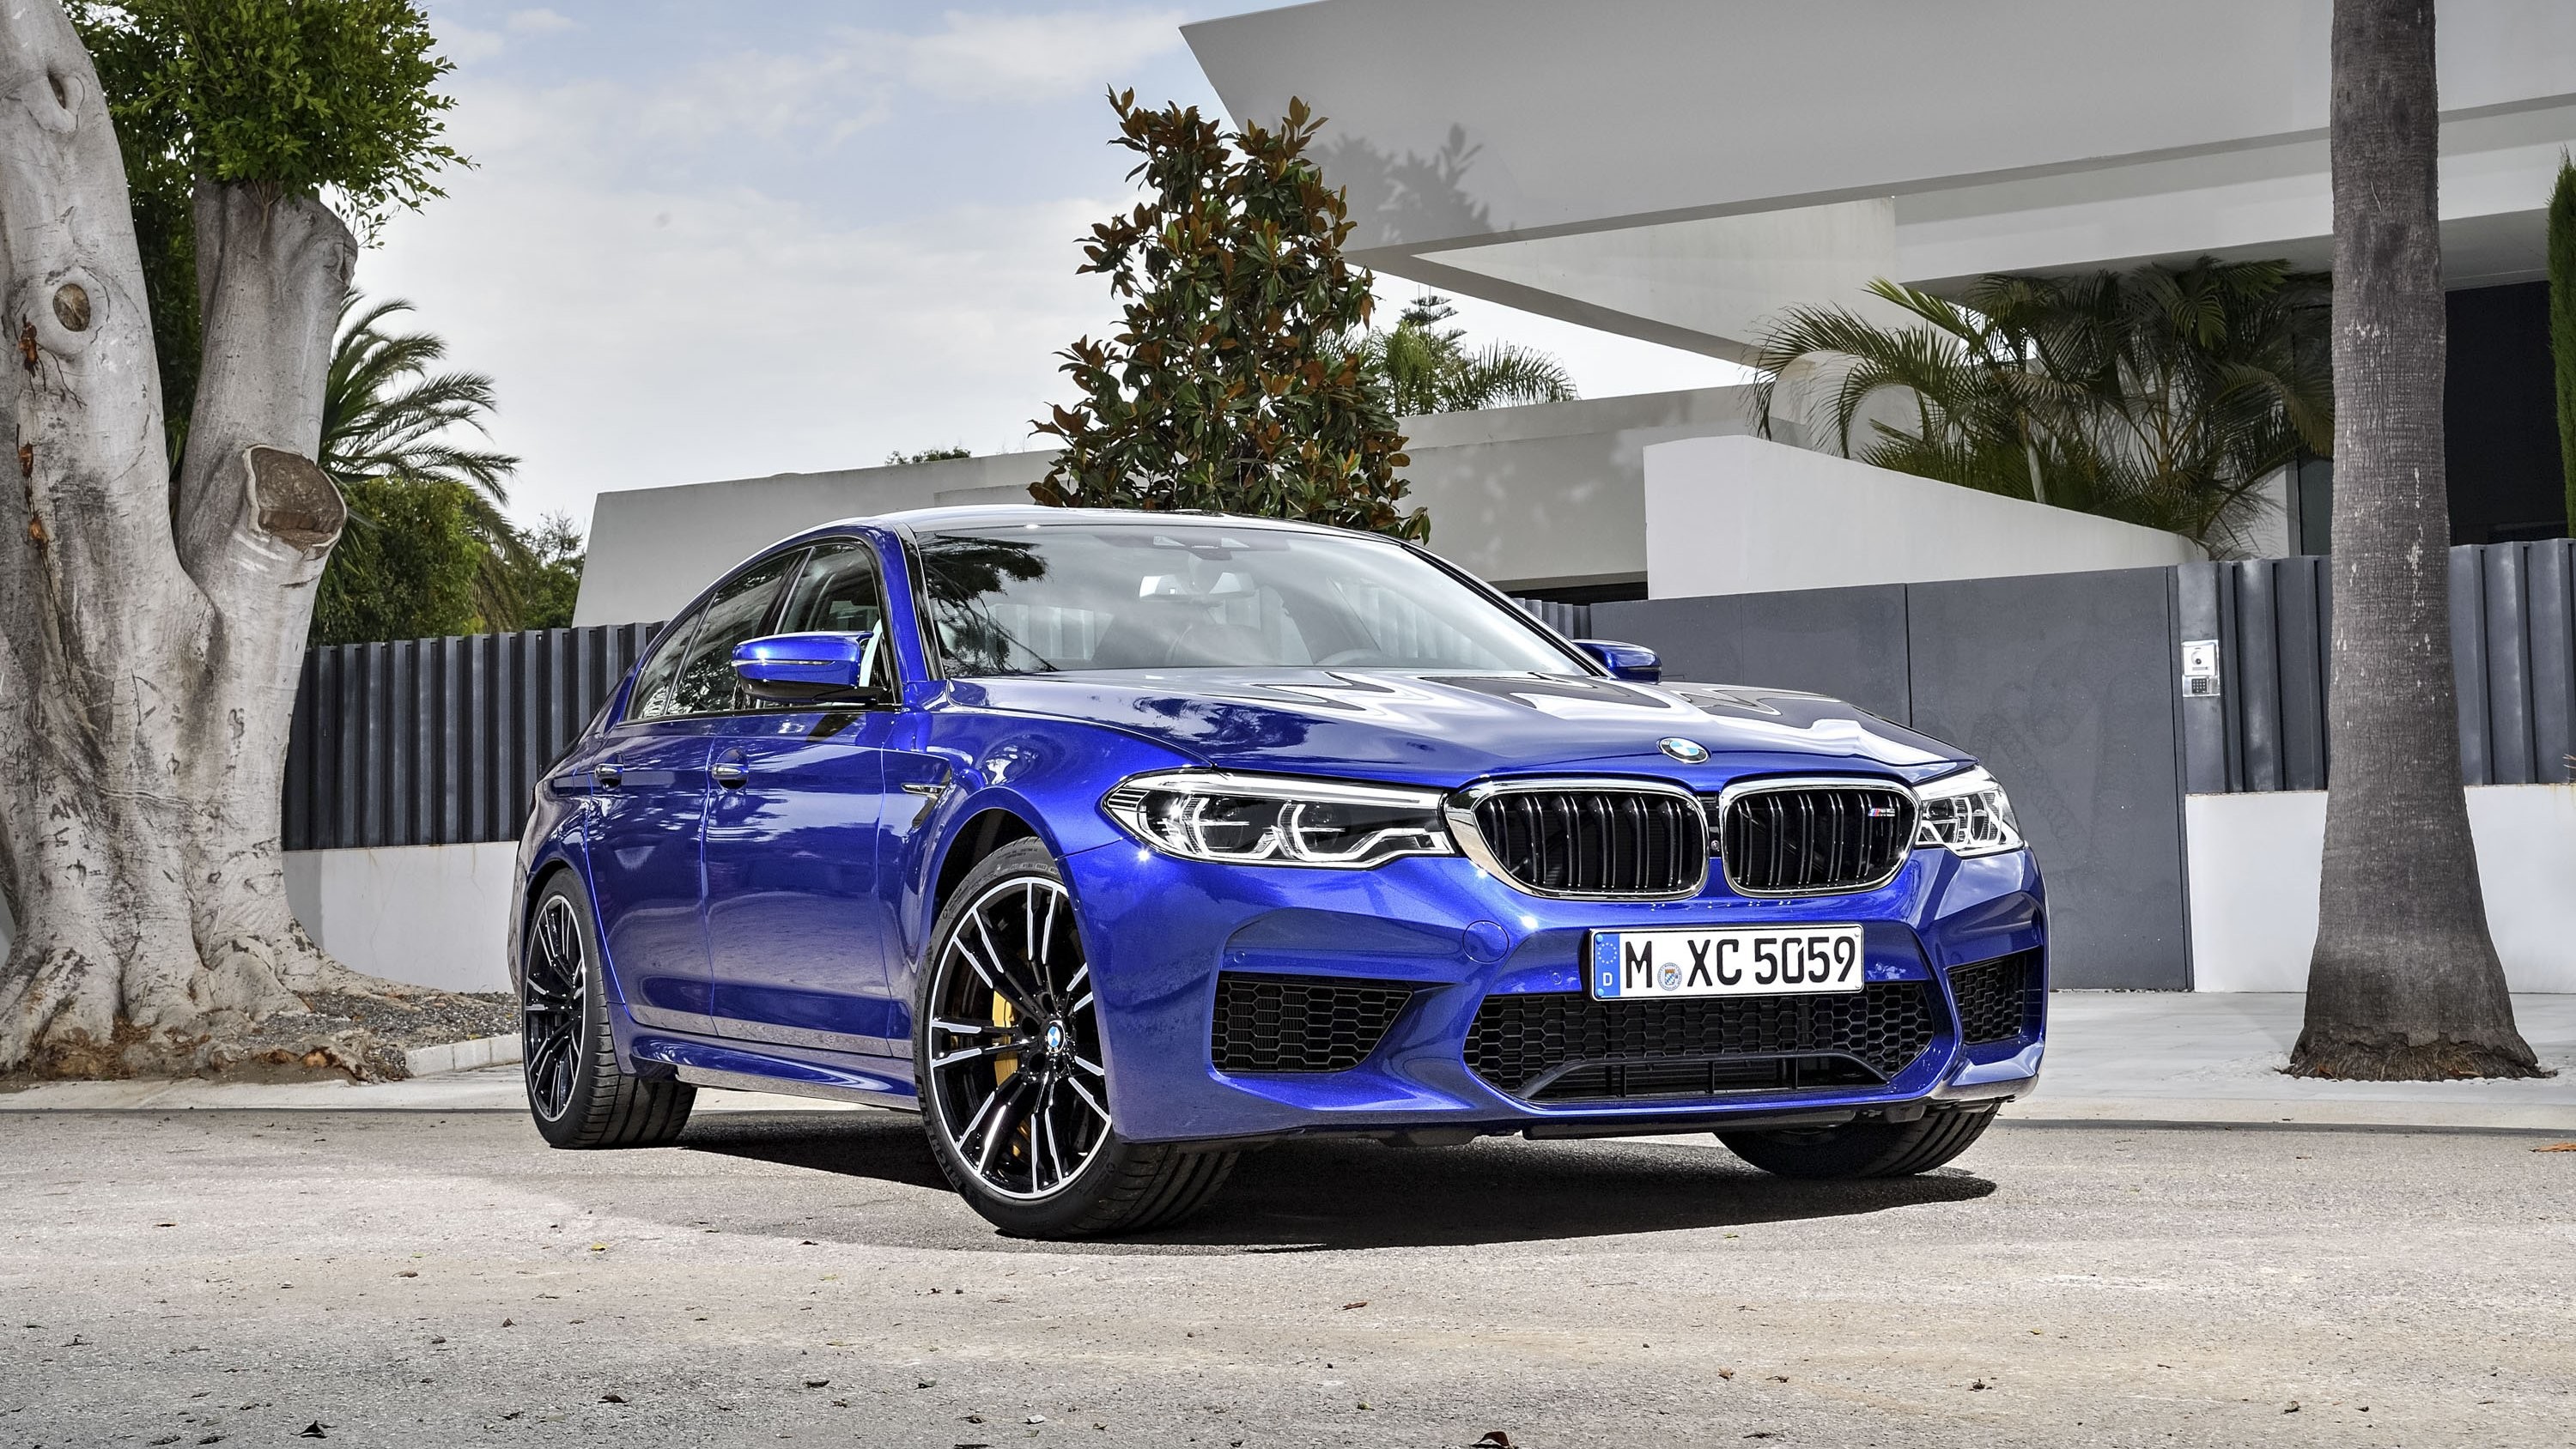 3000x1688 Wallpaper Of The Day: 2018 BMW M5 | Top Speed. Â»